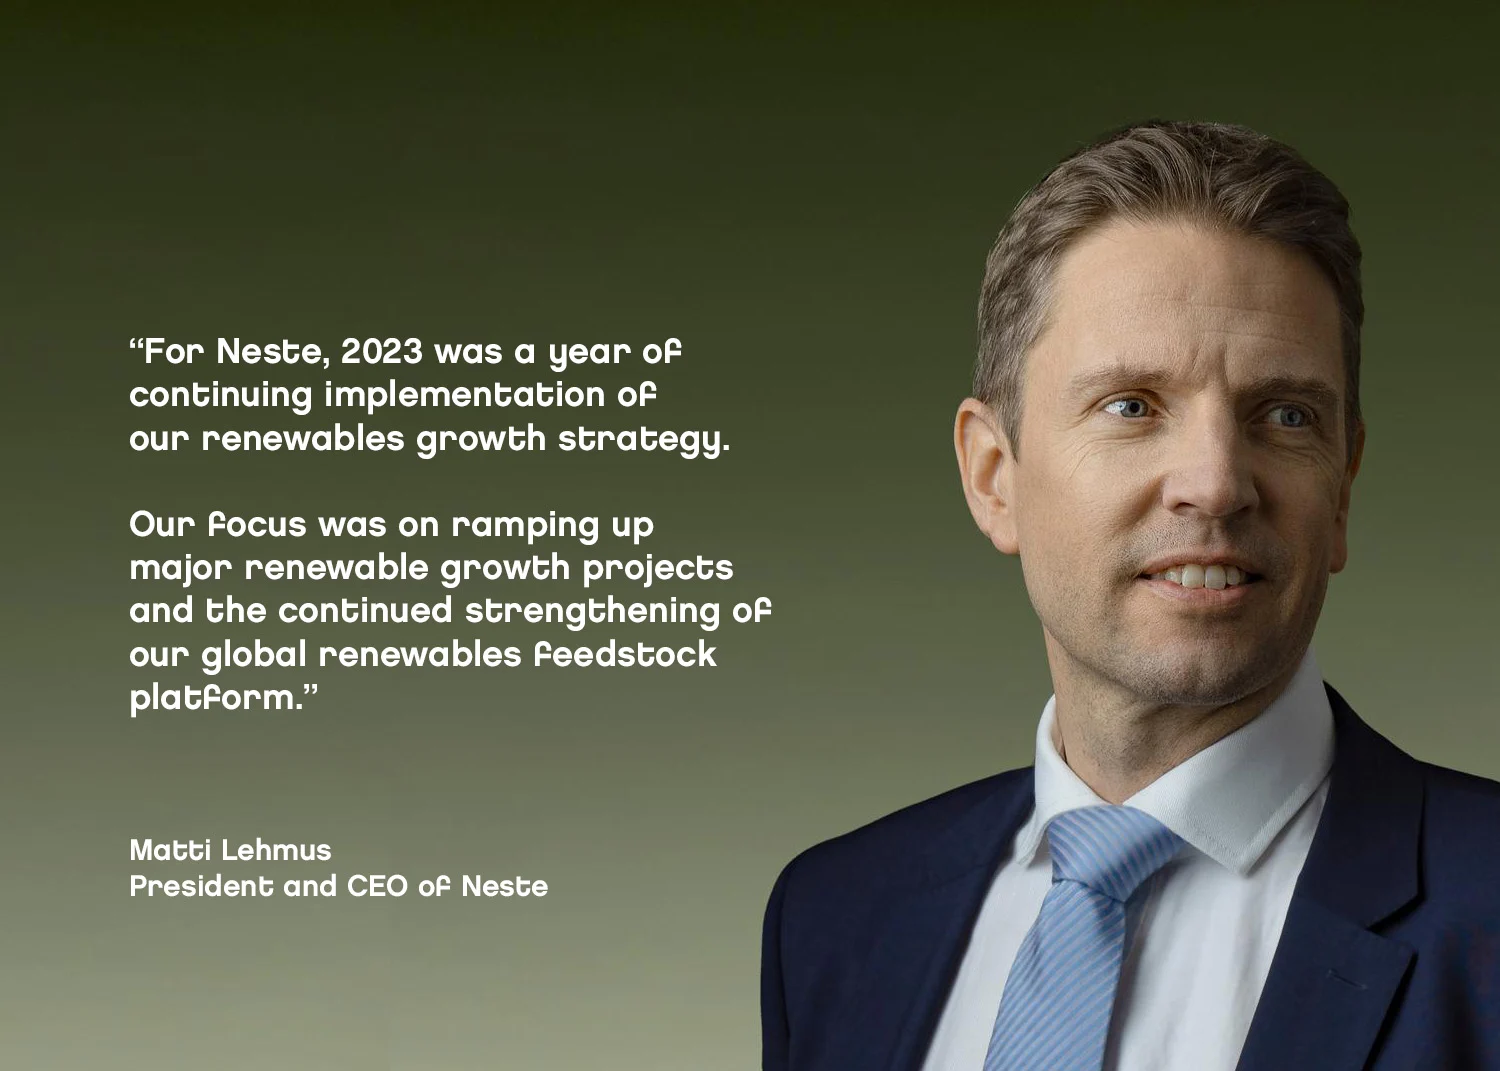 For Neste, 2023 was a year of continuing implementation of our renewables growth strategy. Our focus was on ramping up major renewable growth projects and the continued strengthening of our global renewables feedstock platform. -Matti Lehmus, CEO of Neste